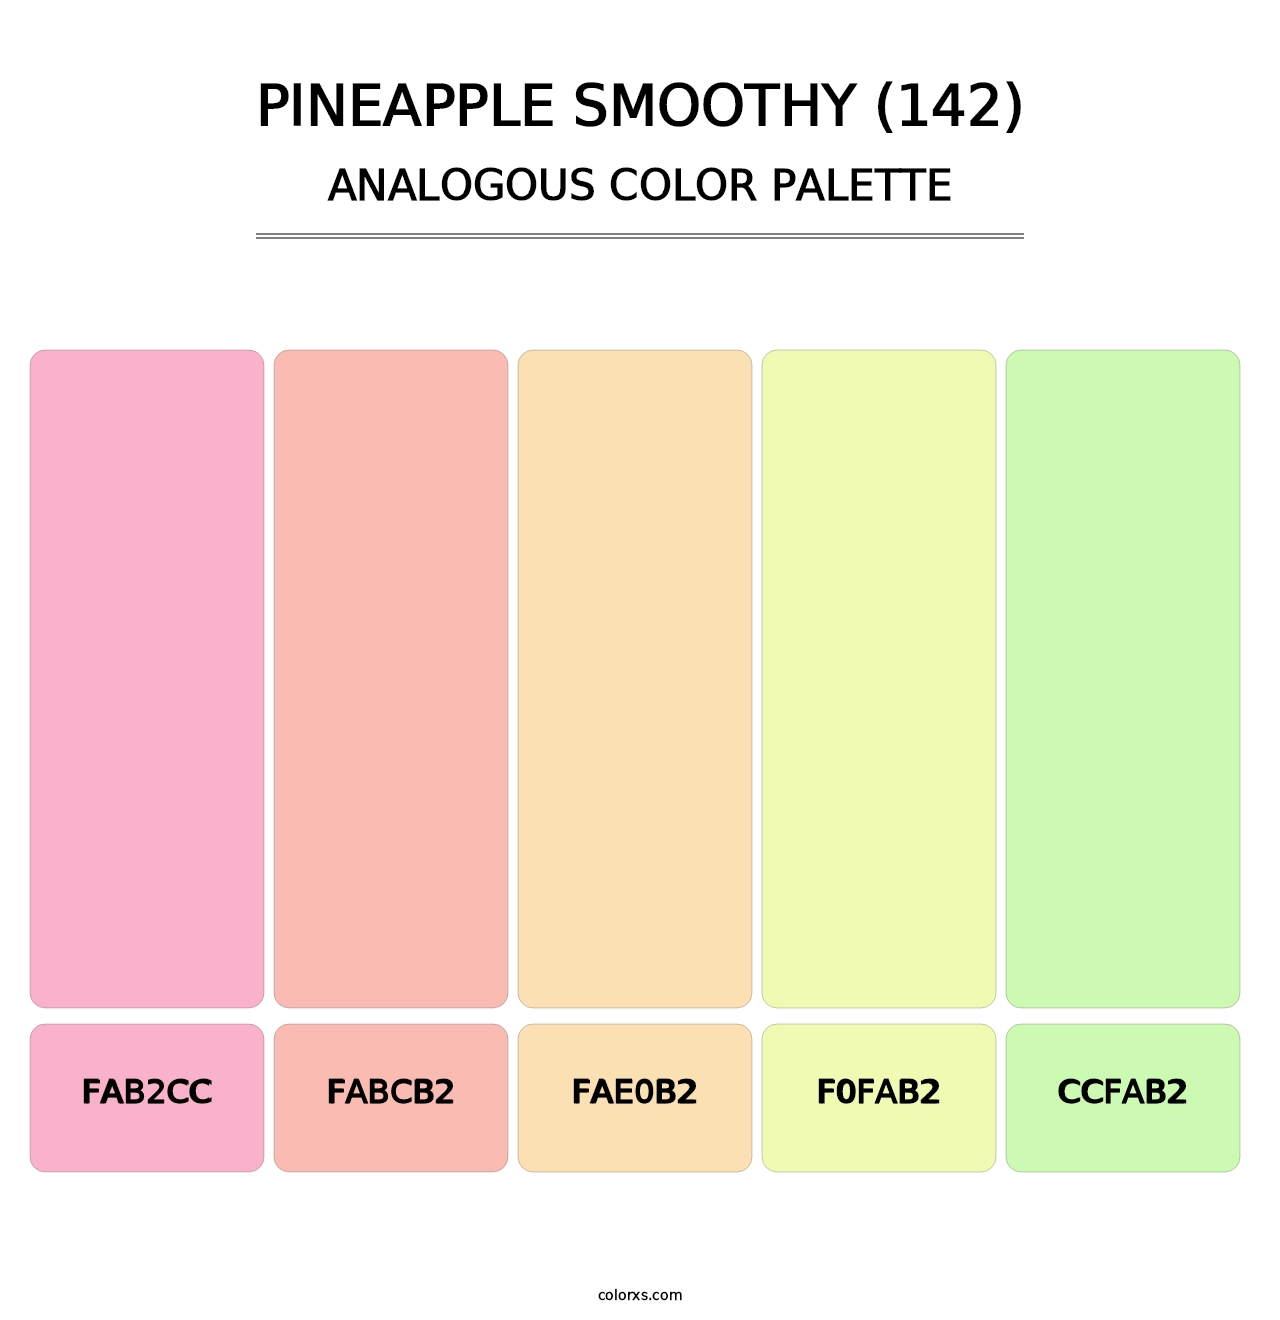 Pineapple Smoothy (142) - Analogous Color Palette